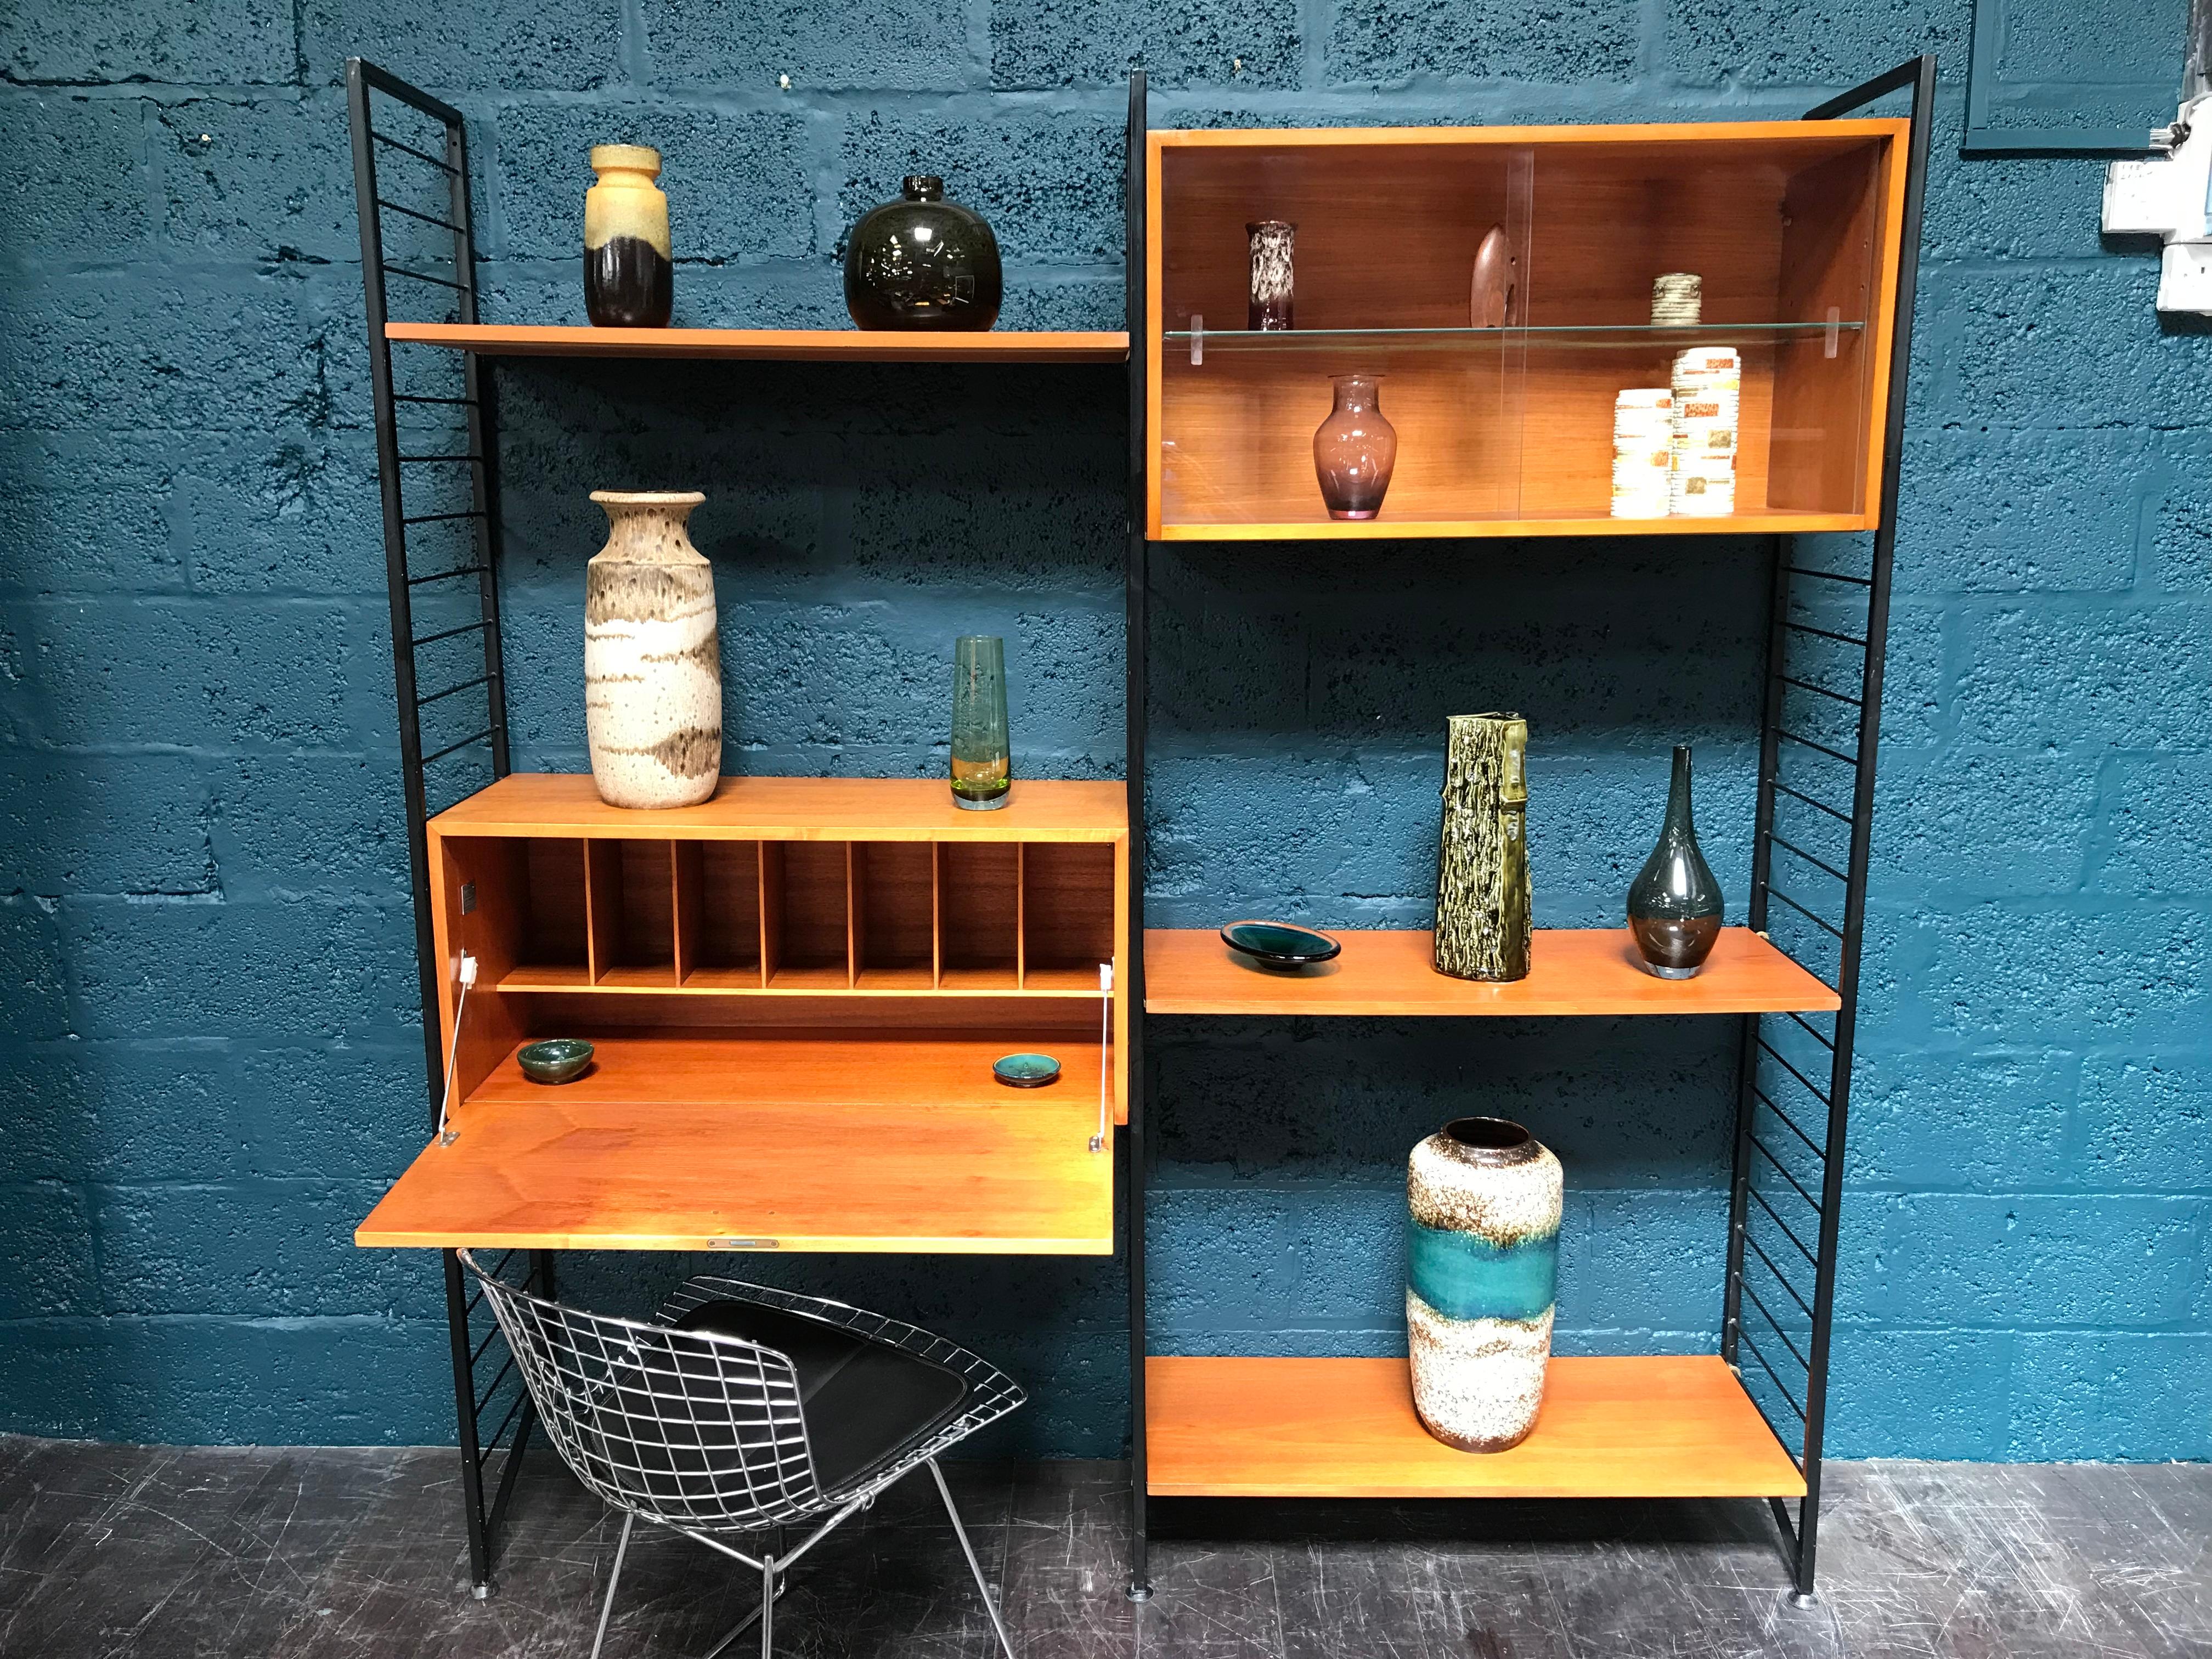 2 Bay Ladderax Teak Midcentury Shelving System with Bureau by Robert Heal In Good Condition For Sale In Glasgow, GB